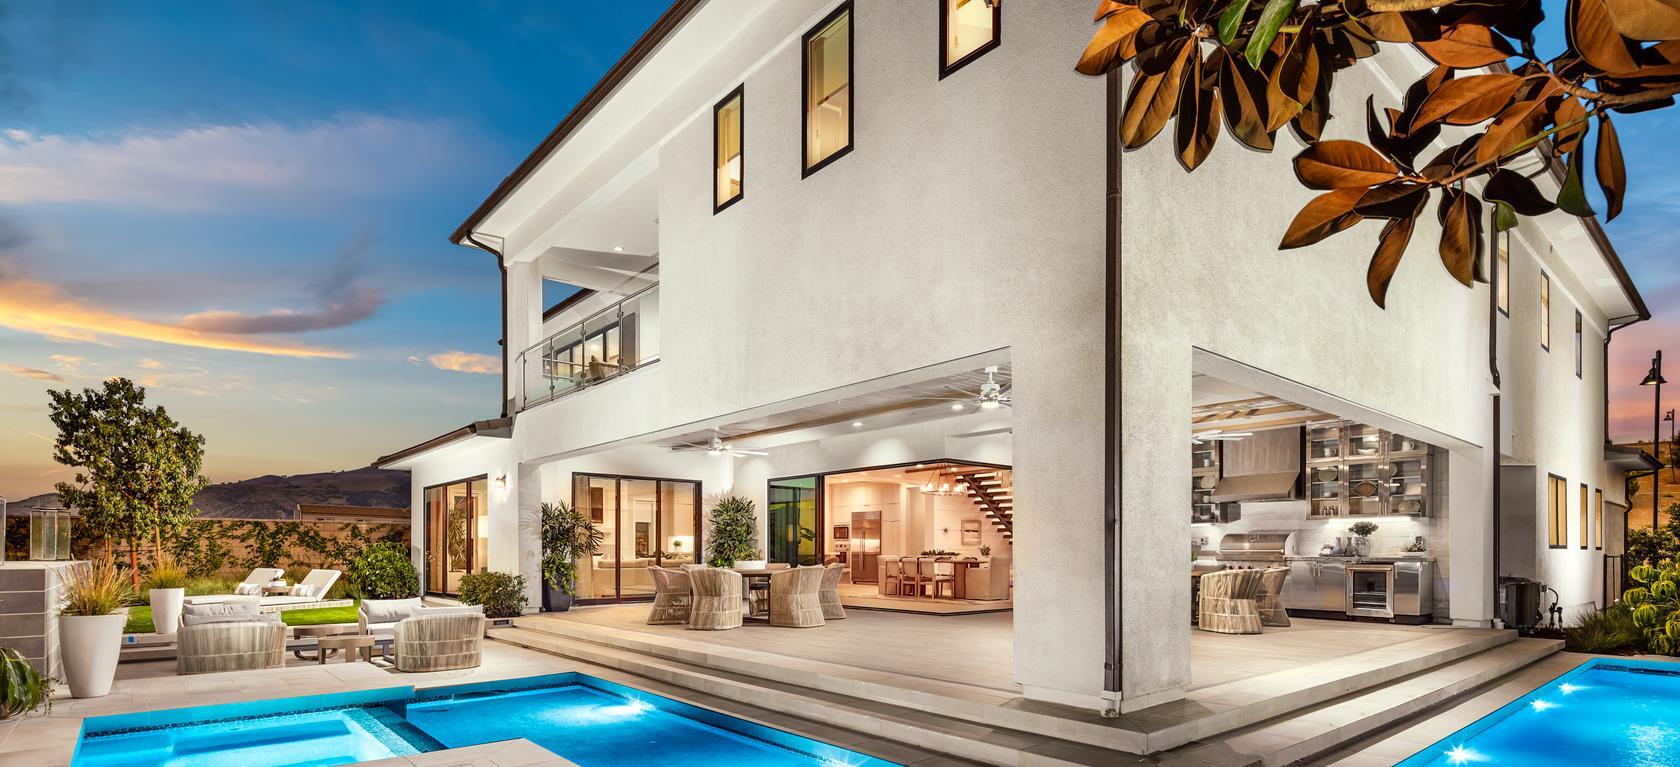 Modern, tan home with luxury surrounding pool and hot tub in Porter Ranch, California